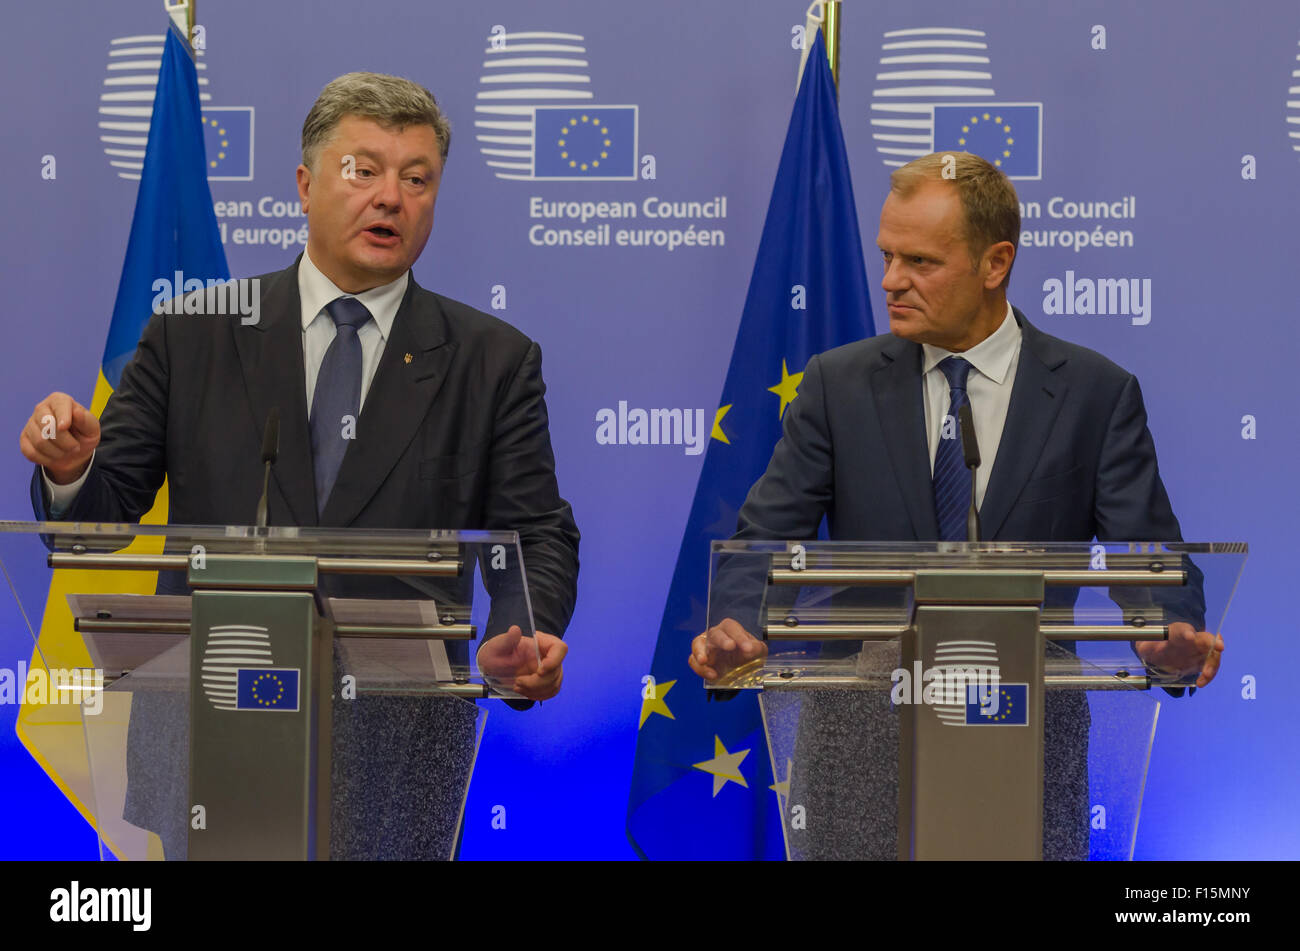 Belgium. 27th Aug, 2015. President of Ukraine Petro Poroshenko (L) and President Donald Tusk (R) give a media press conference at the end of the meeting and state the latest remarks, after his visit to the European Council headquarters. the meeting will be the opportunity to follow the discussions held during the year on the crisis in Eastern Ukraine. © Jonathan Raa/Pacific Press/Alamy Live News Stock Photo